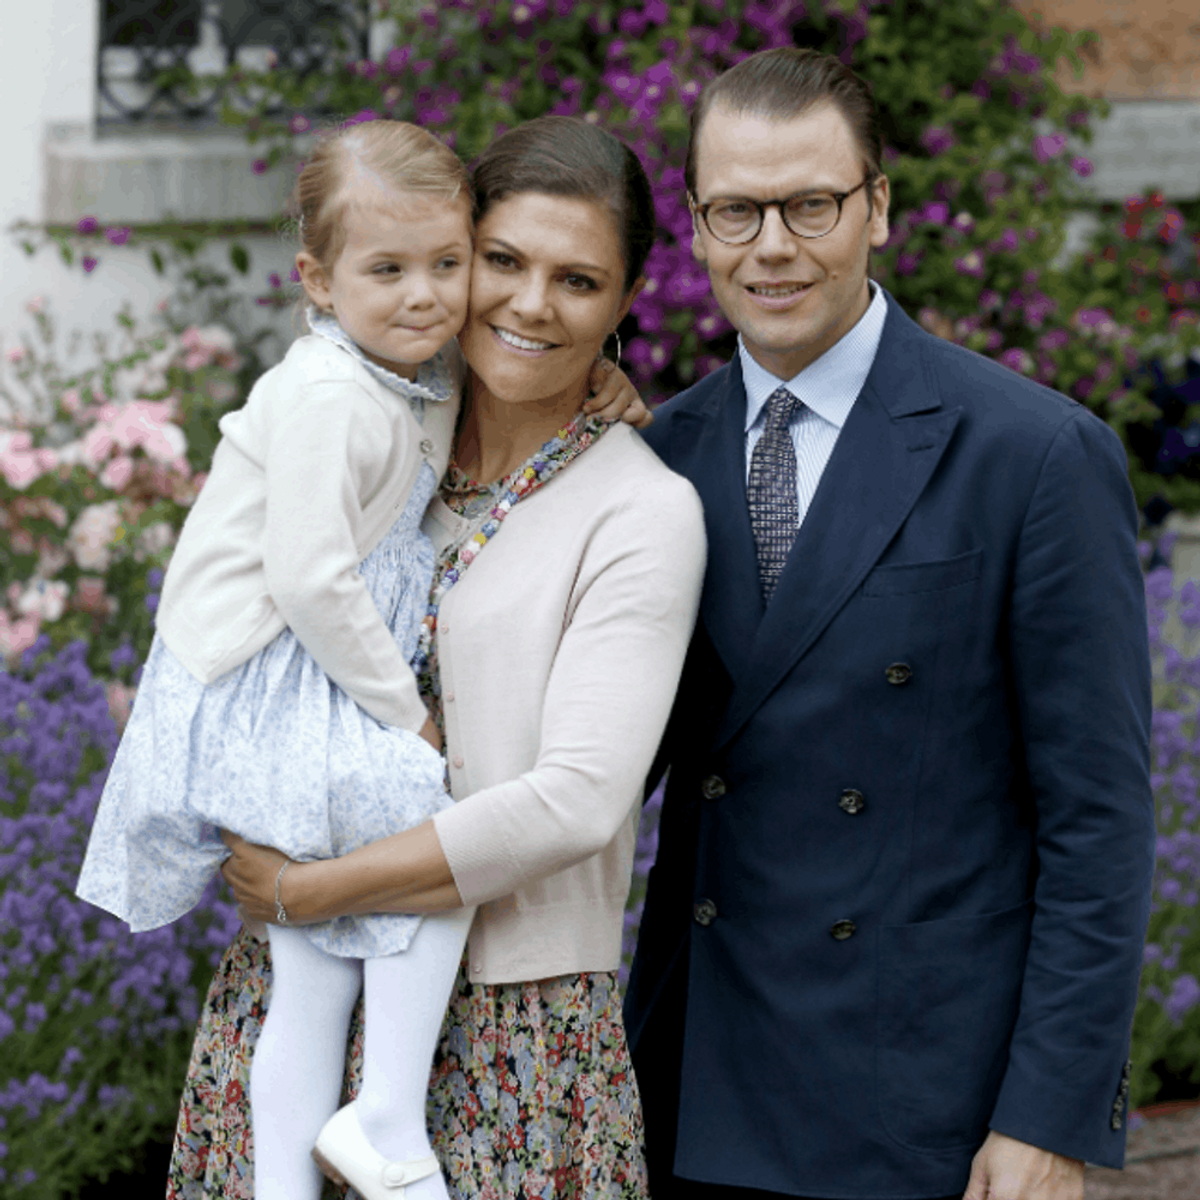 The Swedish Royal Couple Reveals the ADORABLE Name of Their New Baby Boy